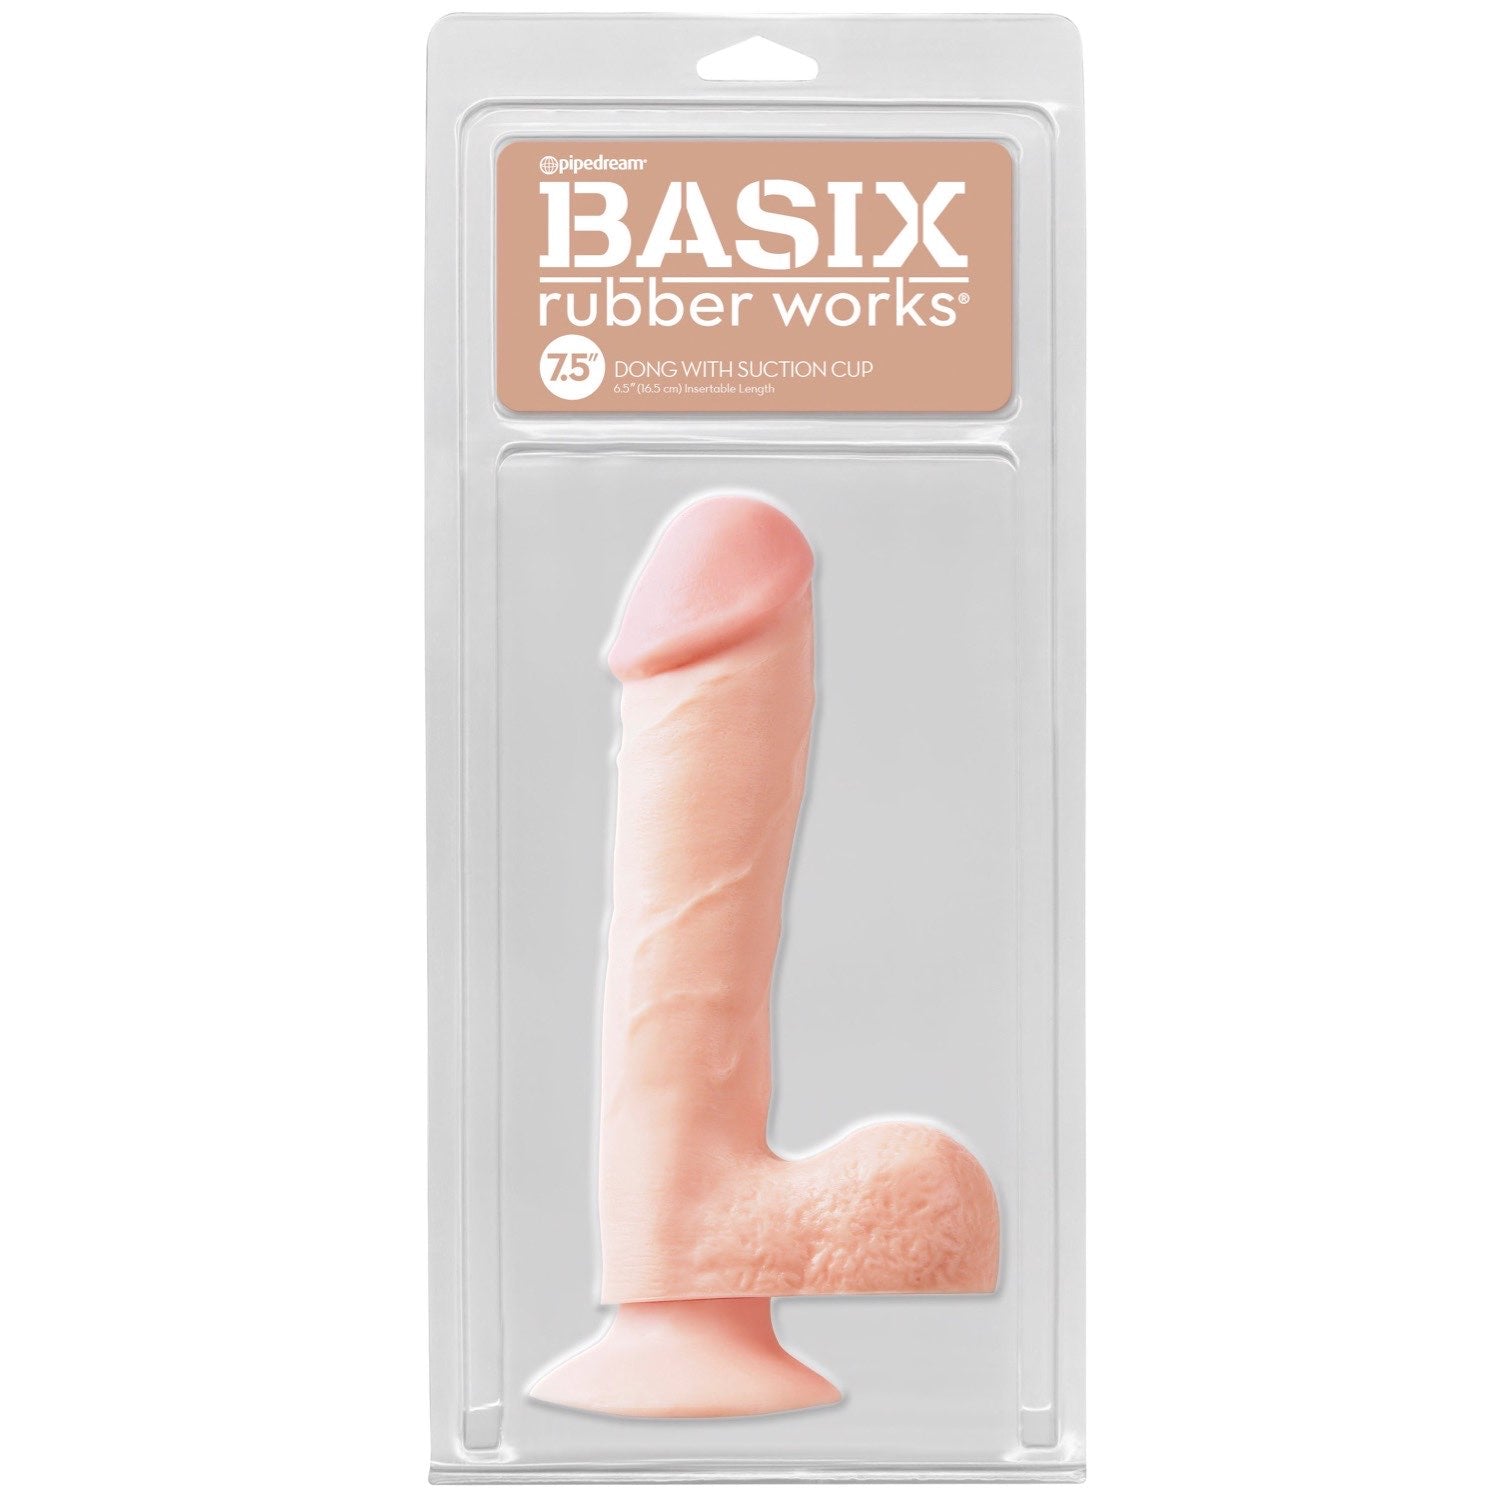 Basix Rubber Works 7.5&quot; Dong with Suction Cup - Flesh 19.1 cm (7.5&quot;) Dong by Pipedream